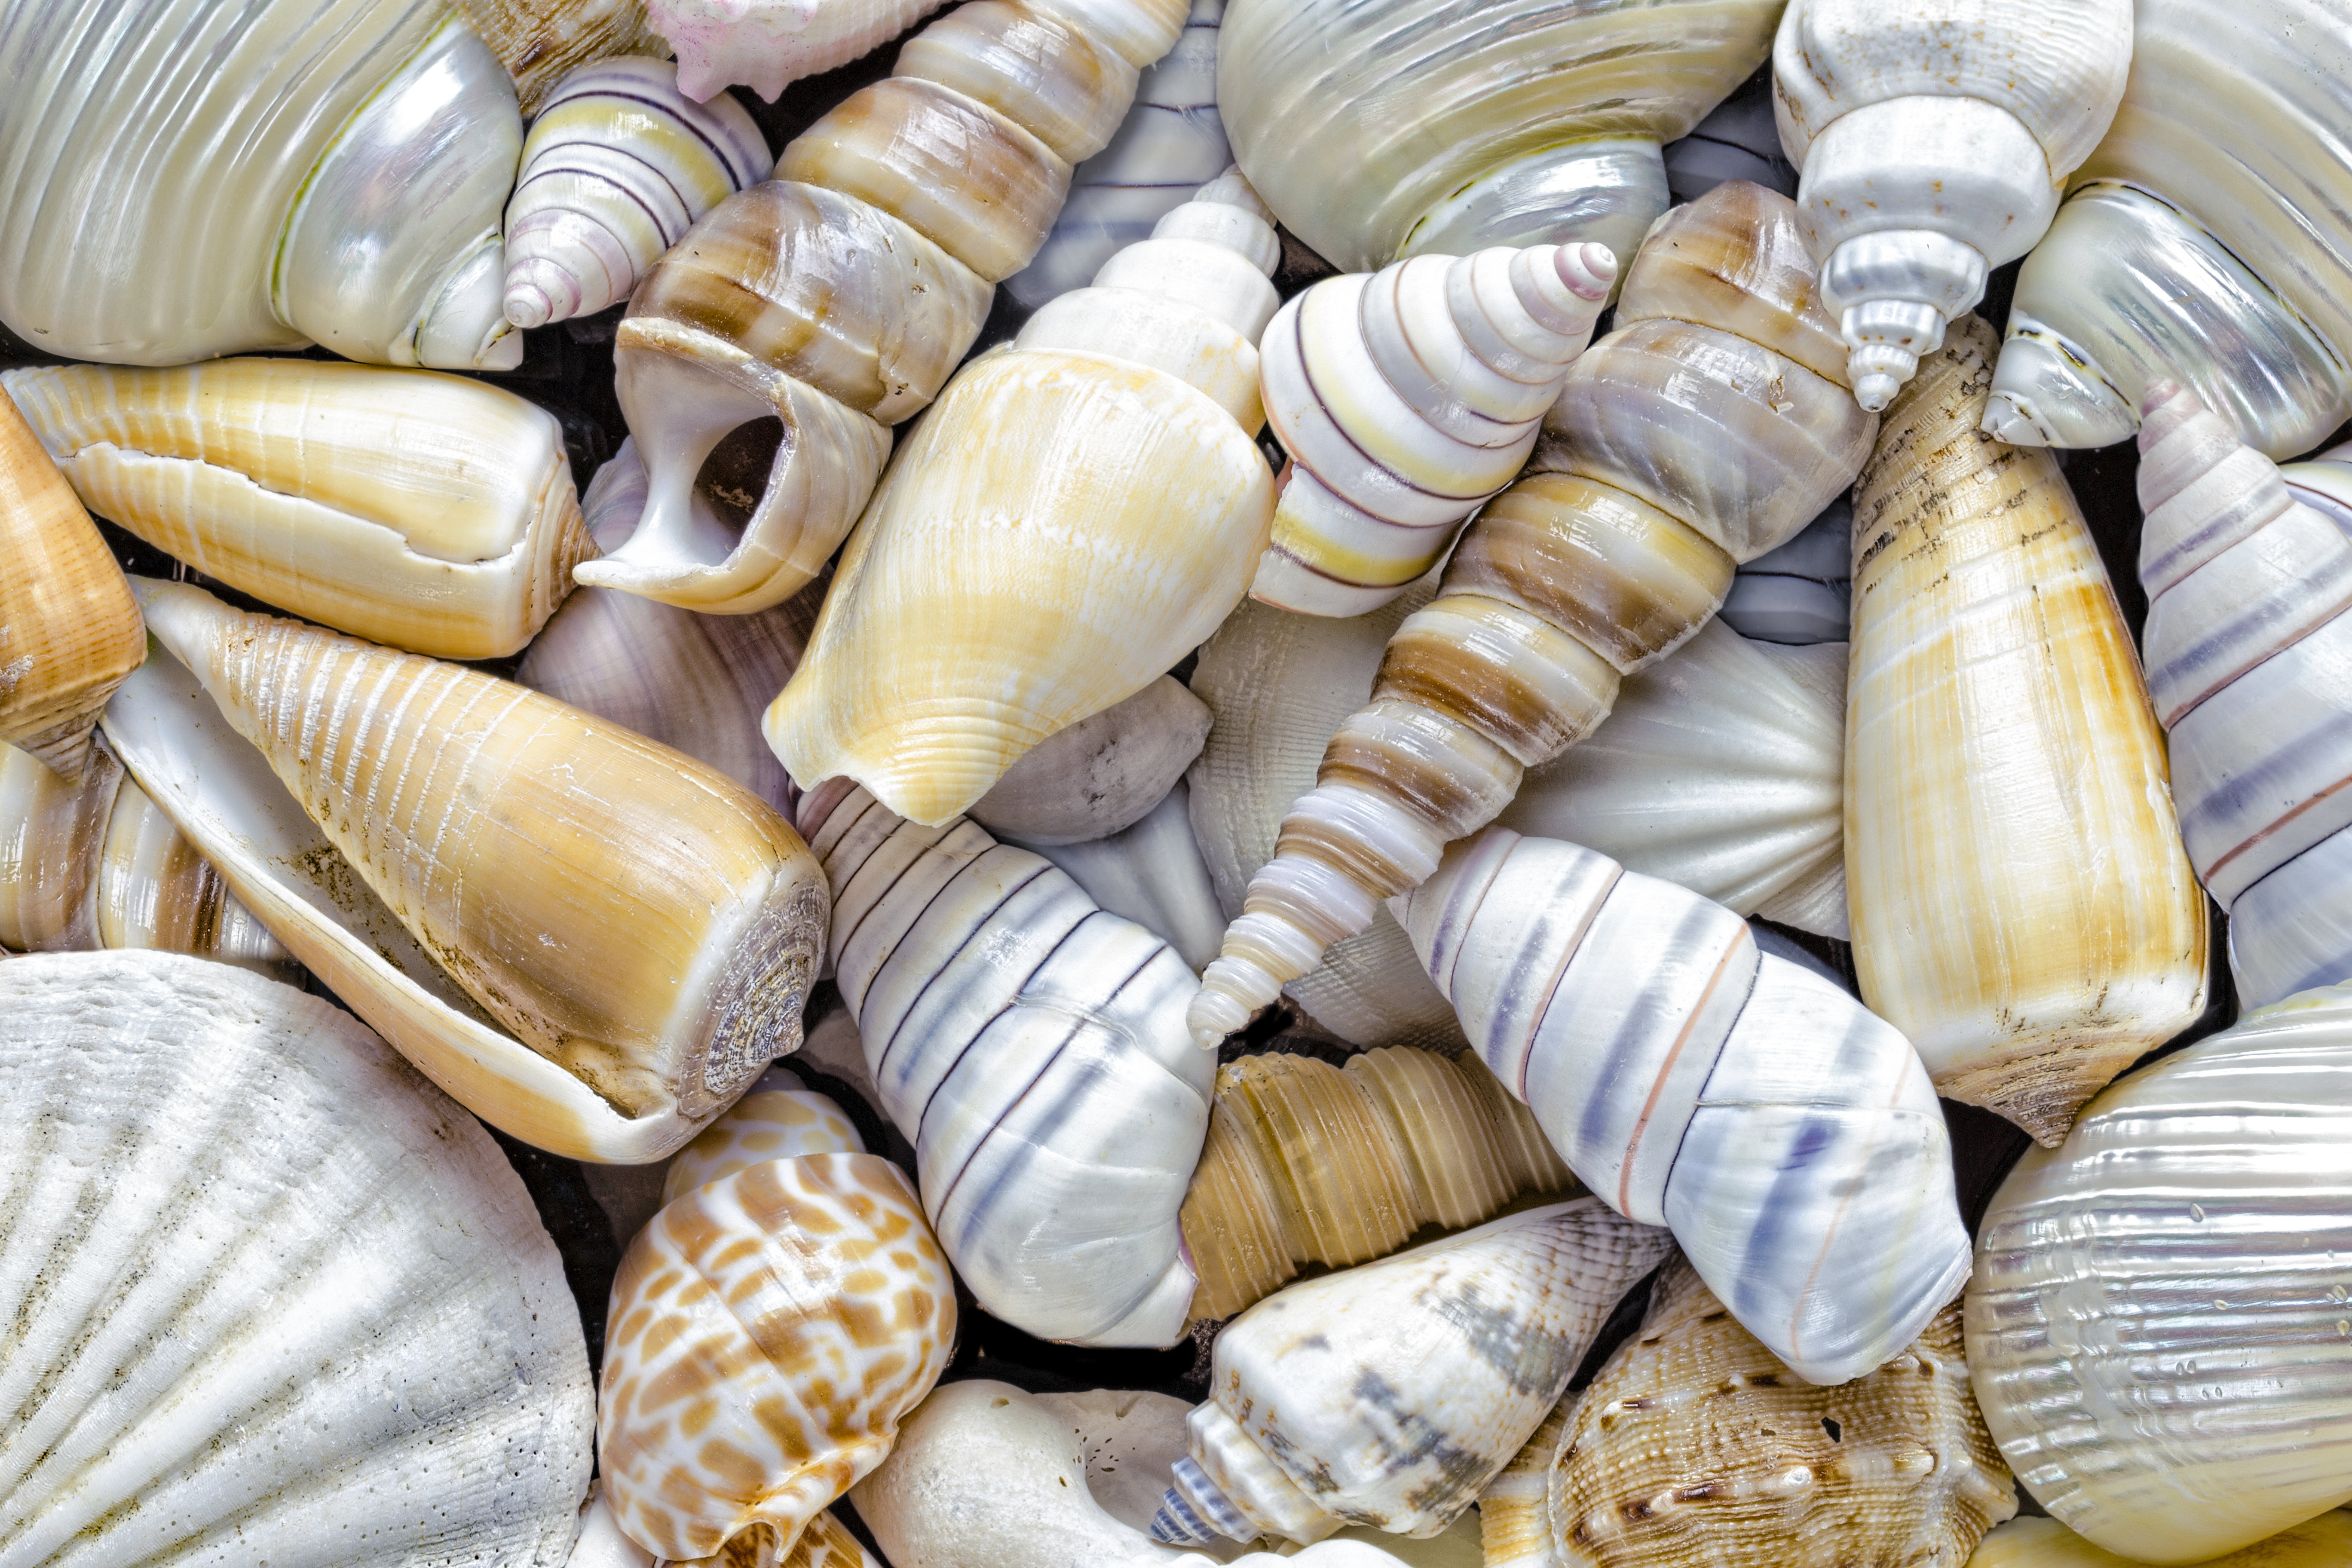 How are seashells created? Or any other shell, such as a snail's